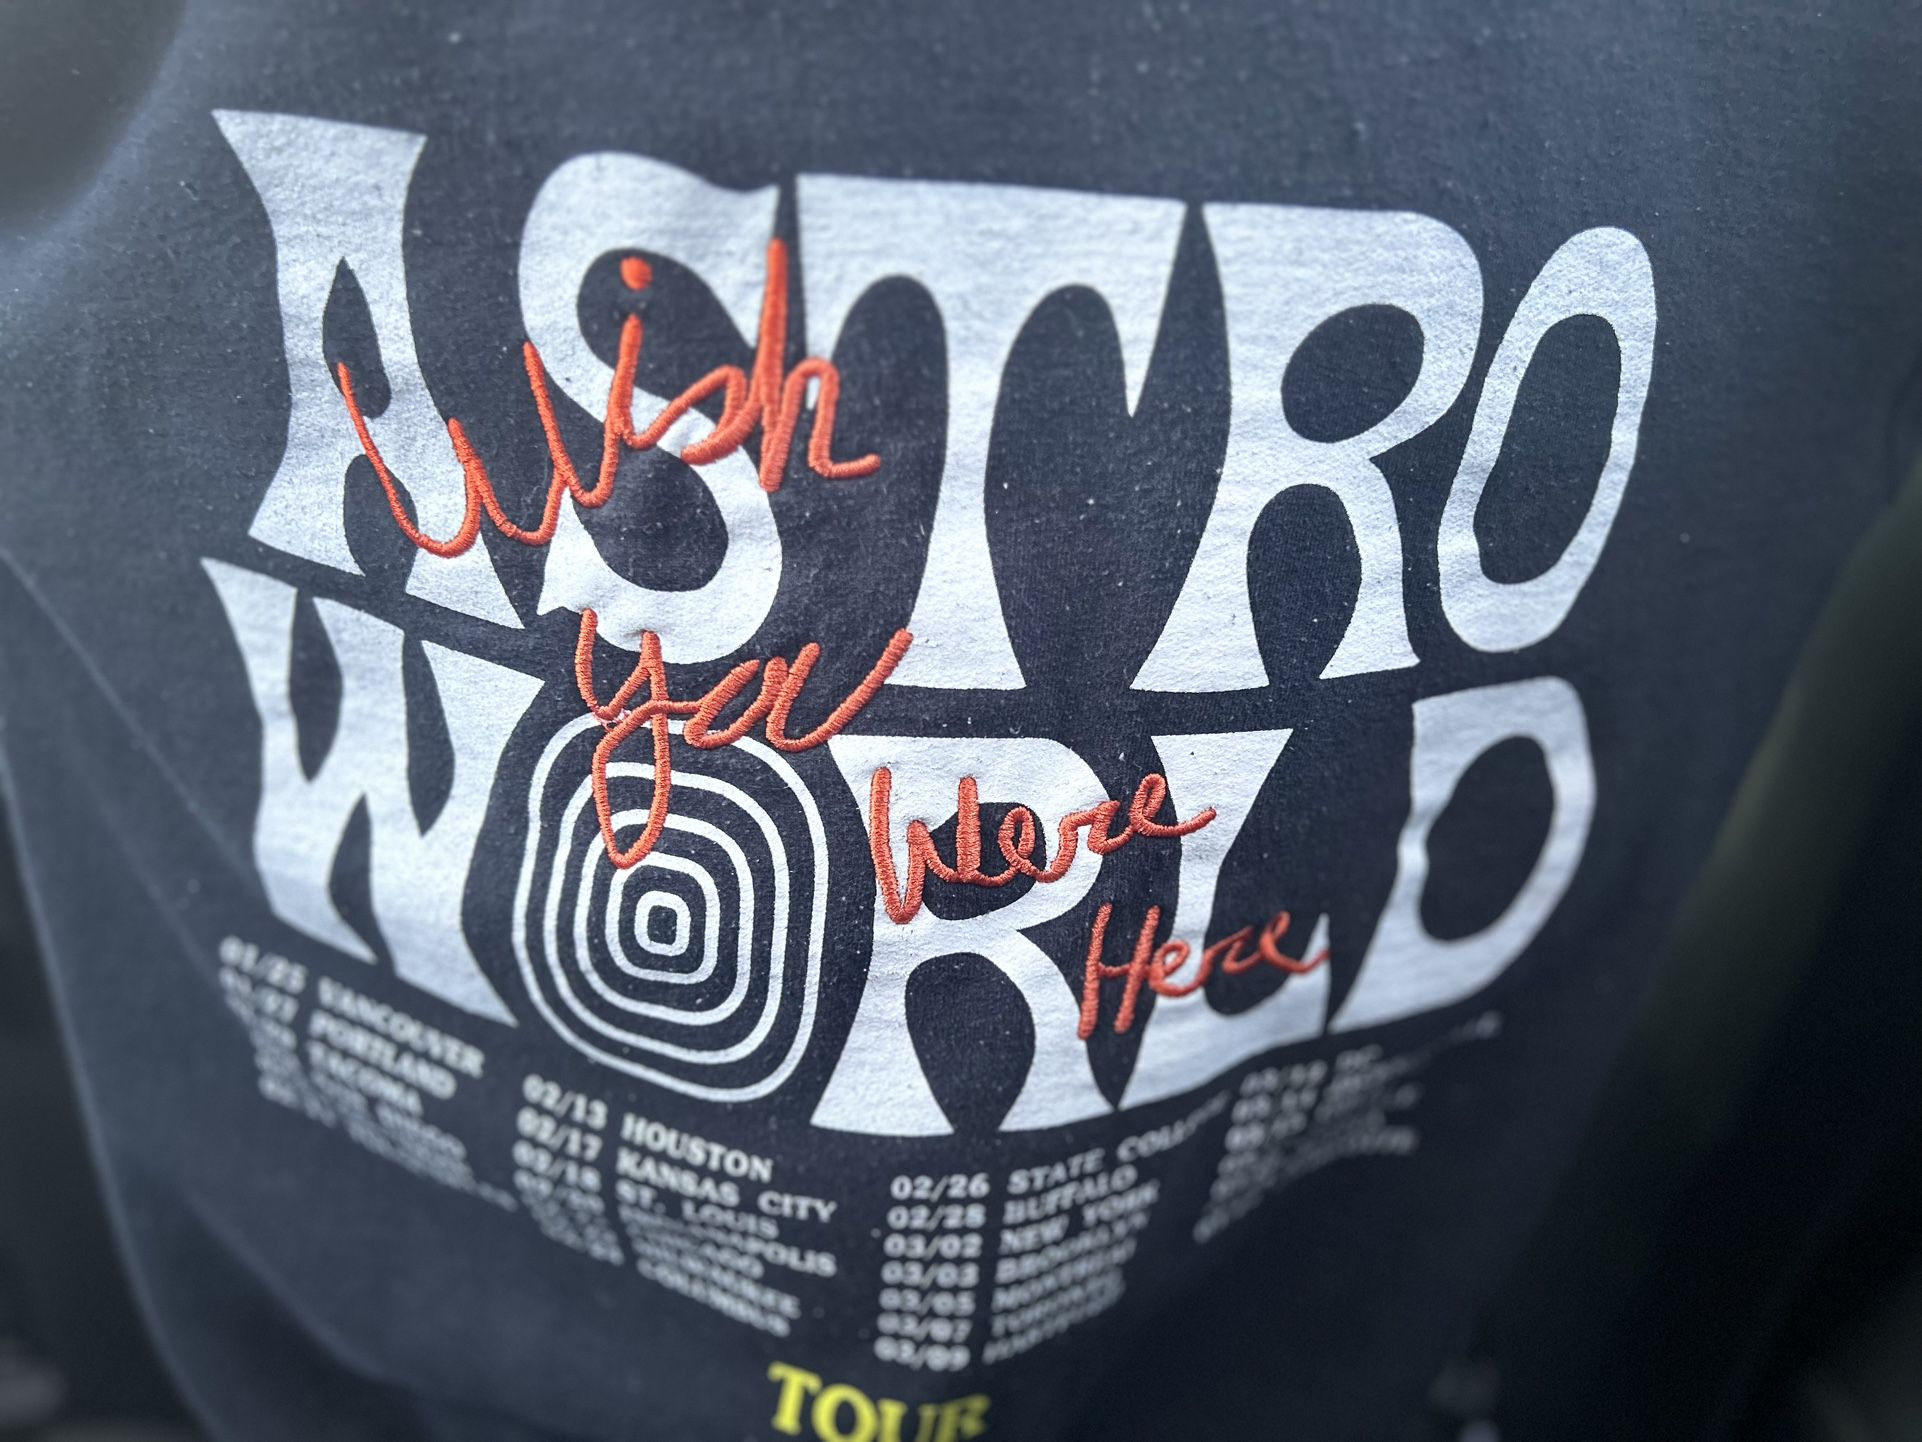 Cheap astroworld hoodie wish you were here